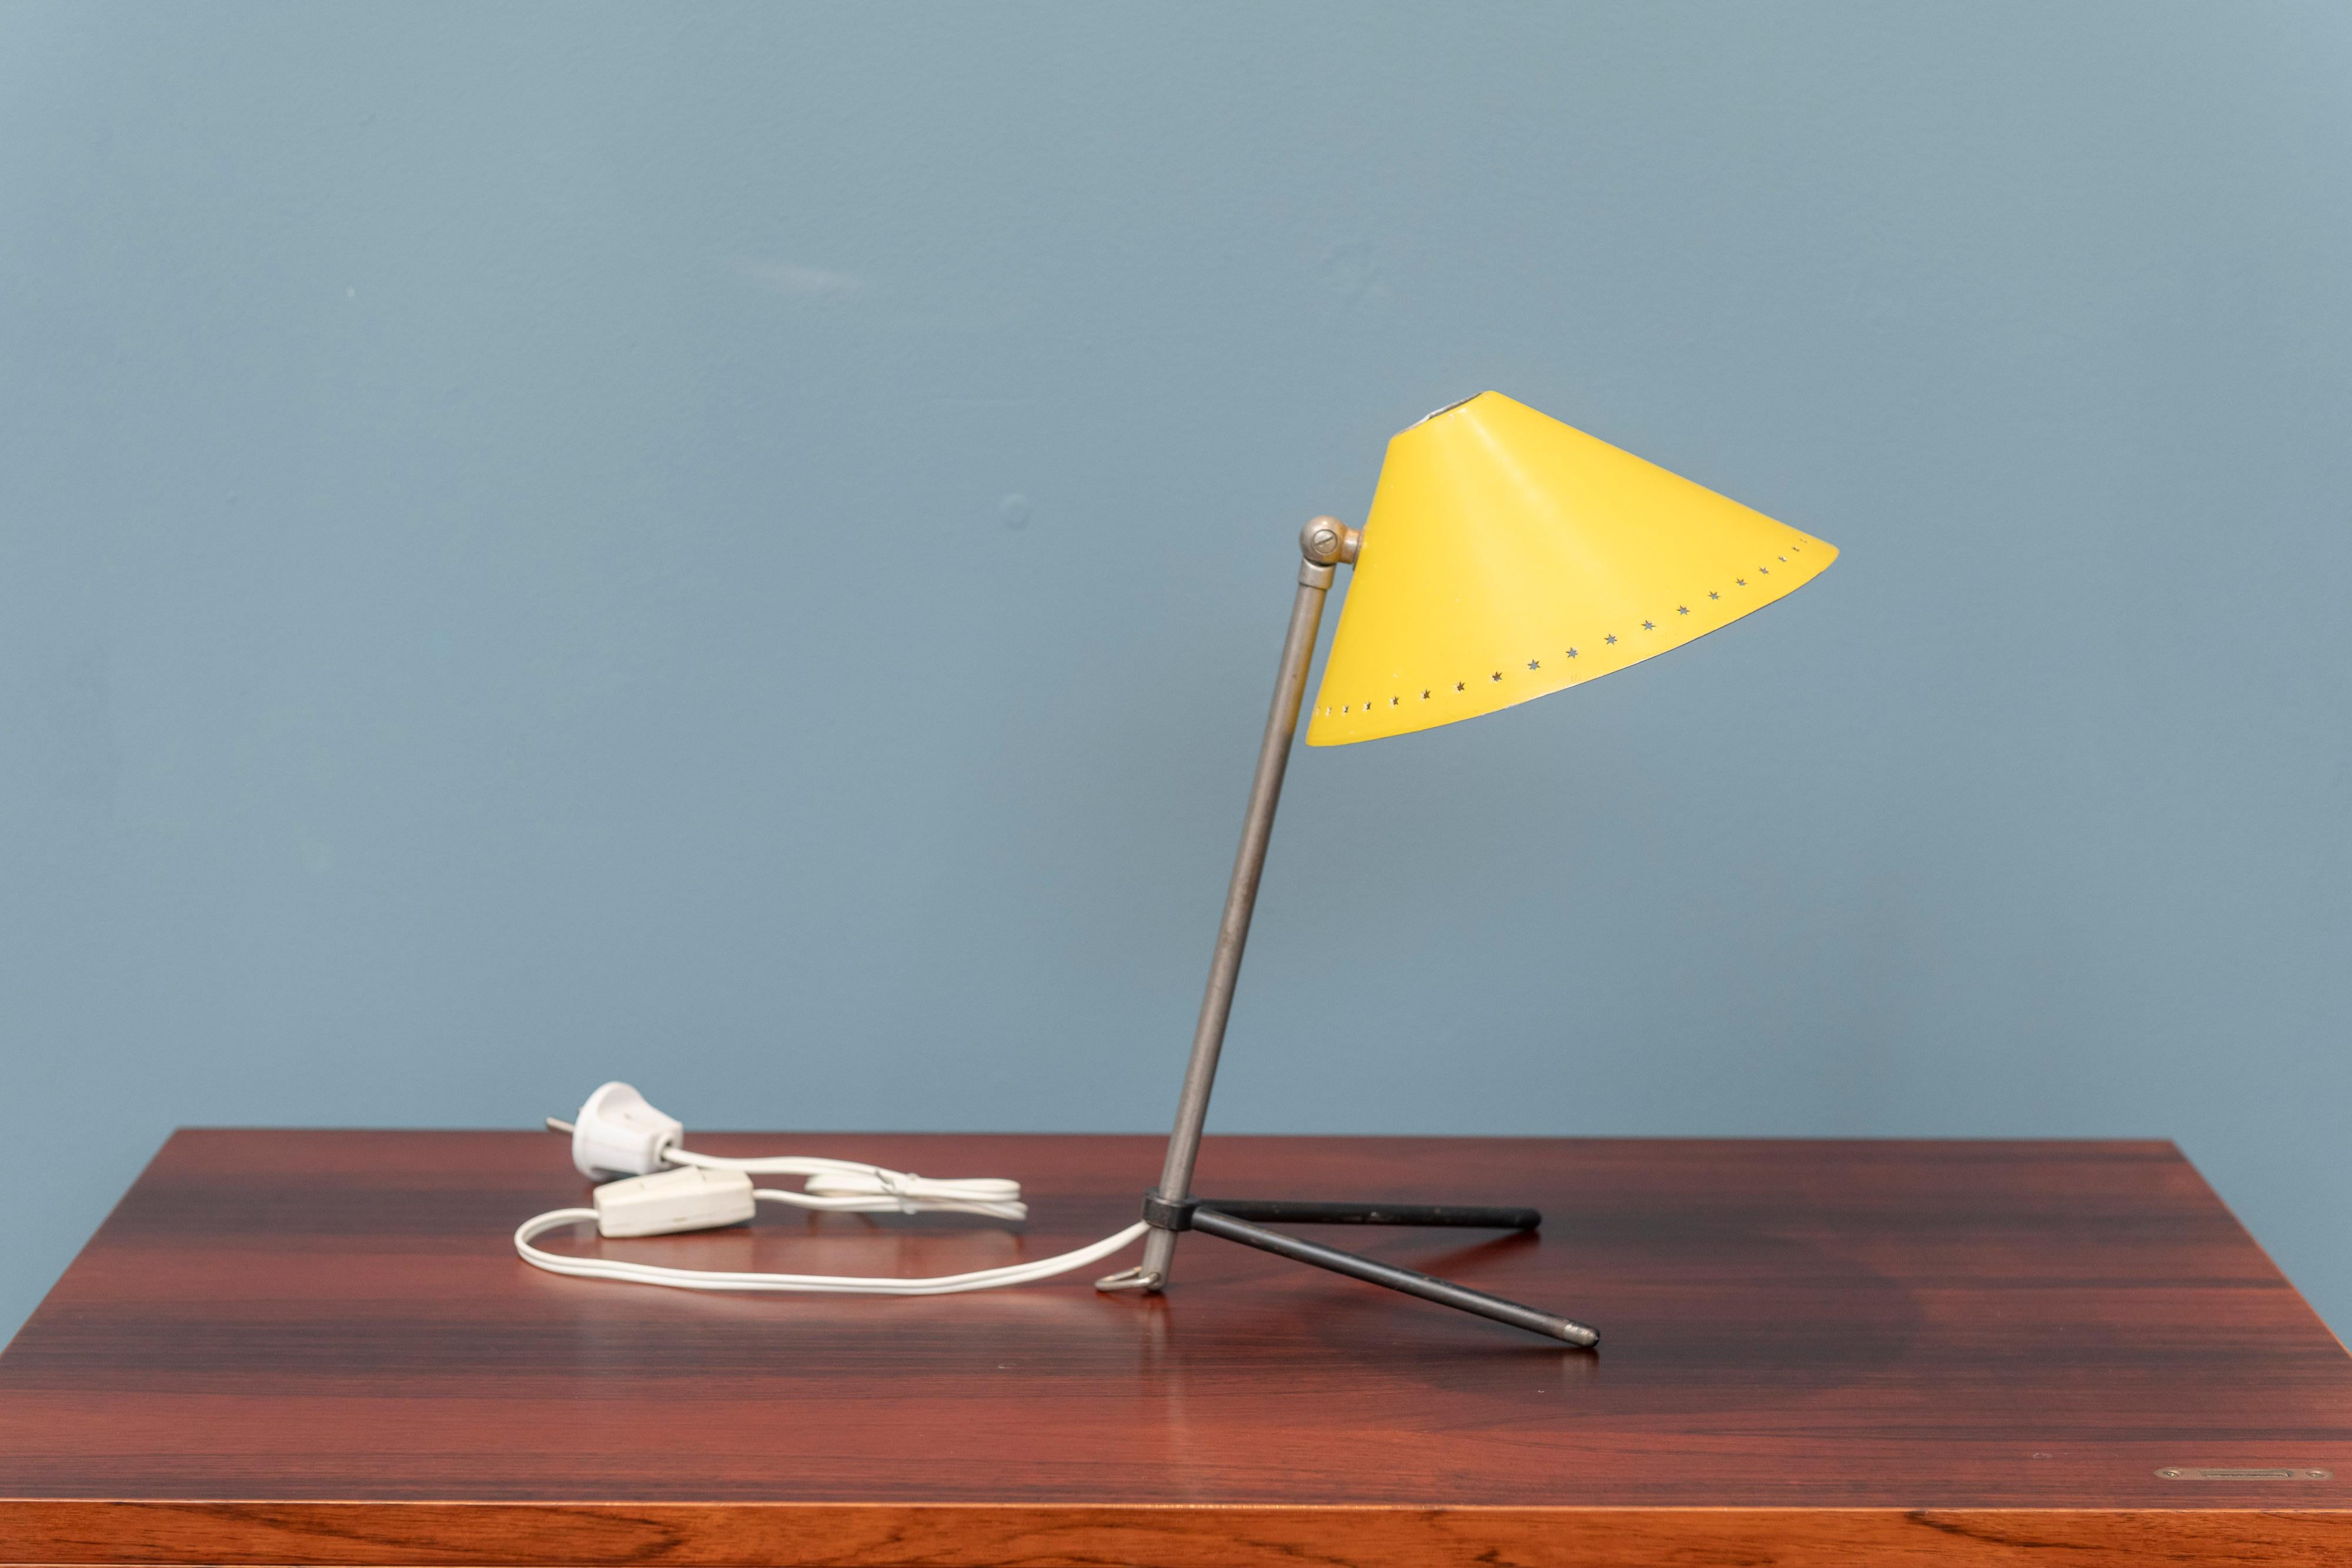 Elegant and stylish table or wall lamp for Dutch lighting company Hala. Tripod base adjustable in height and angle. Minimalistic, beautiful and well thought out designed lamp in very good original condition.